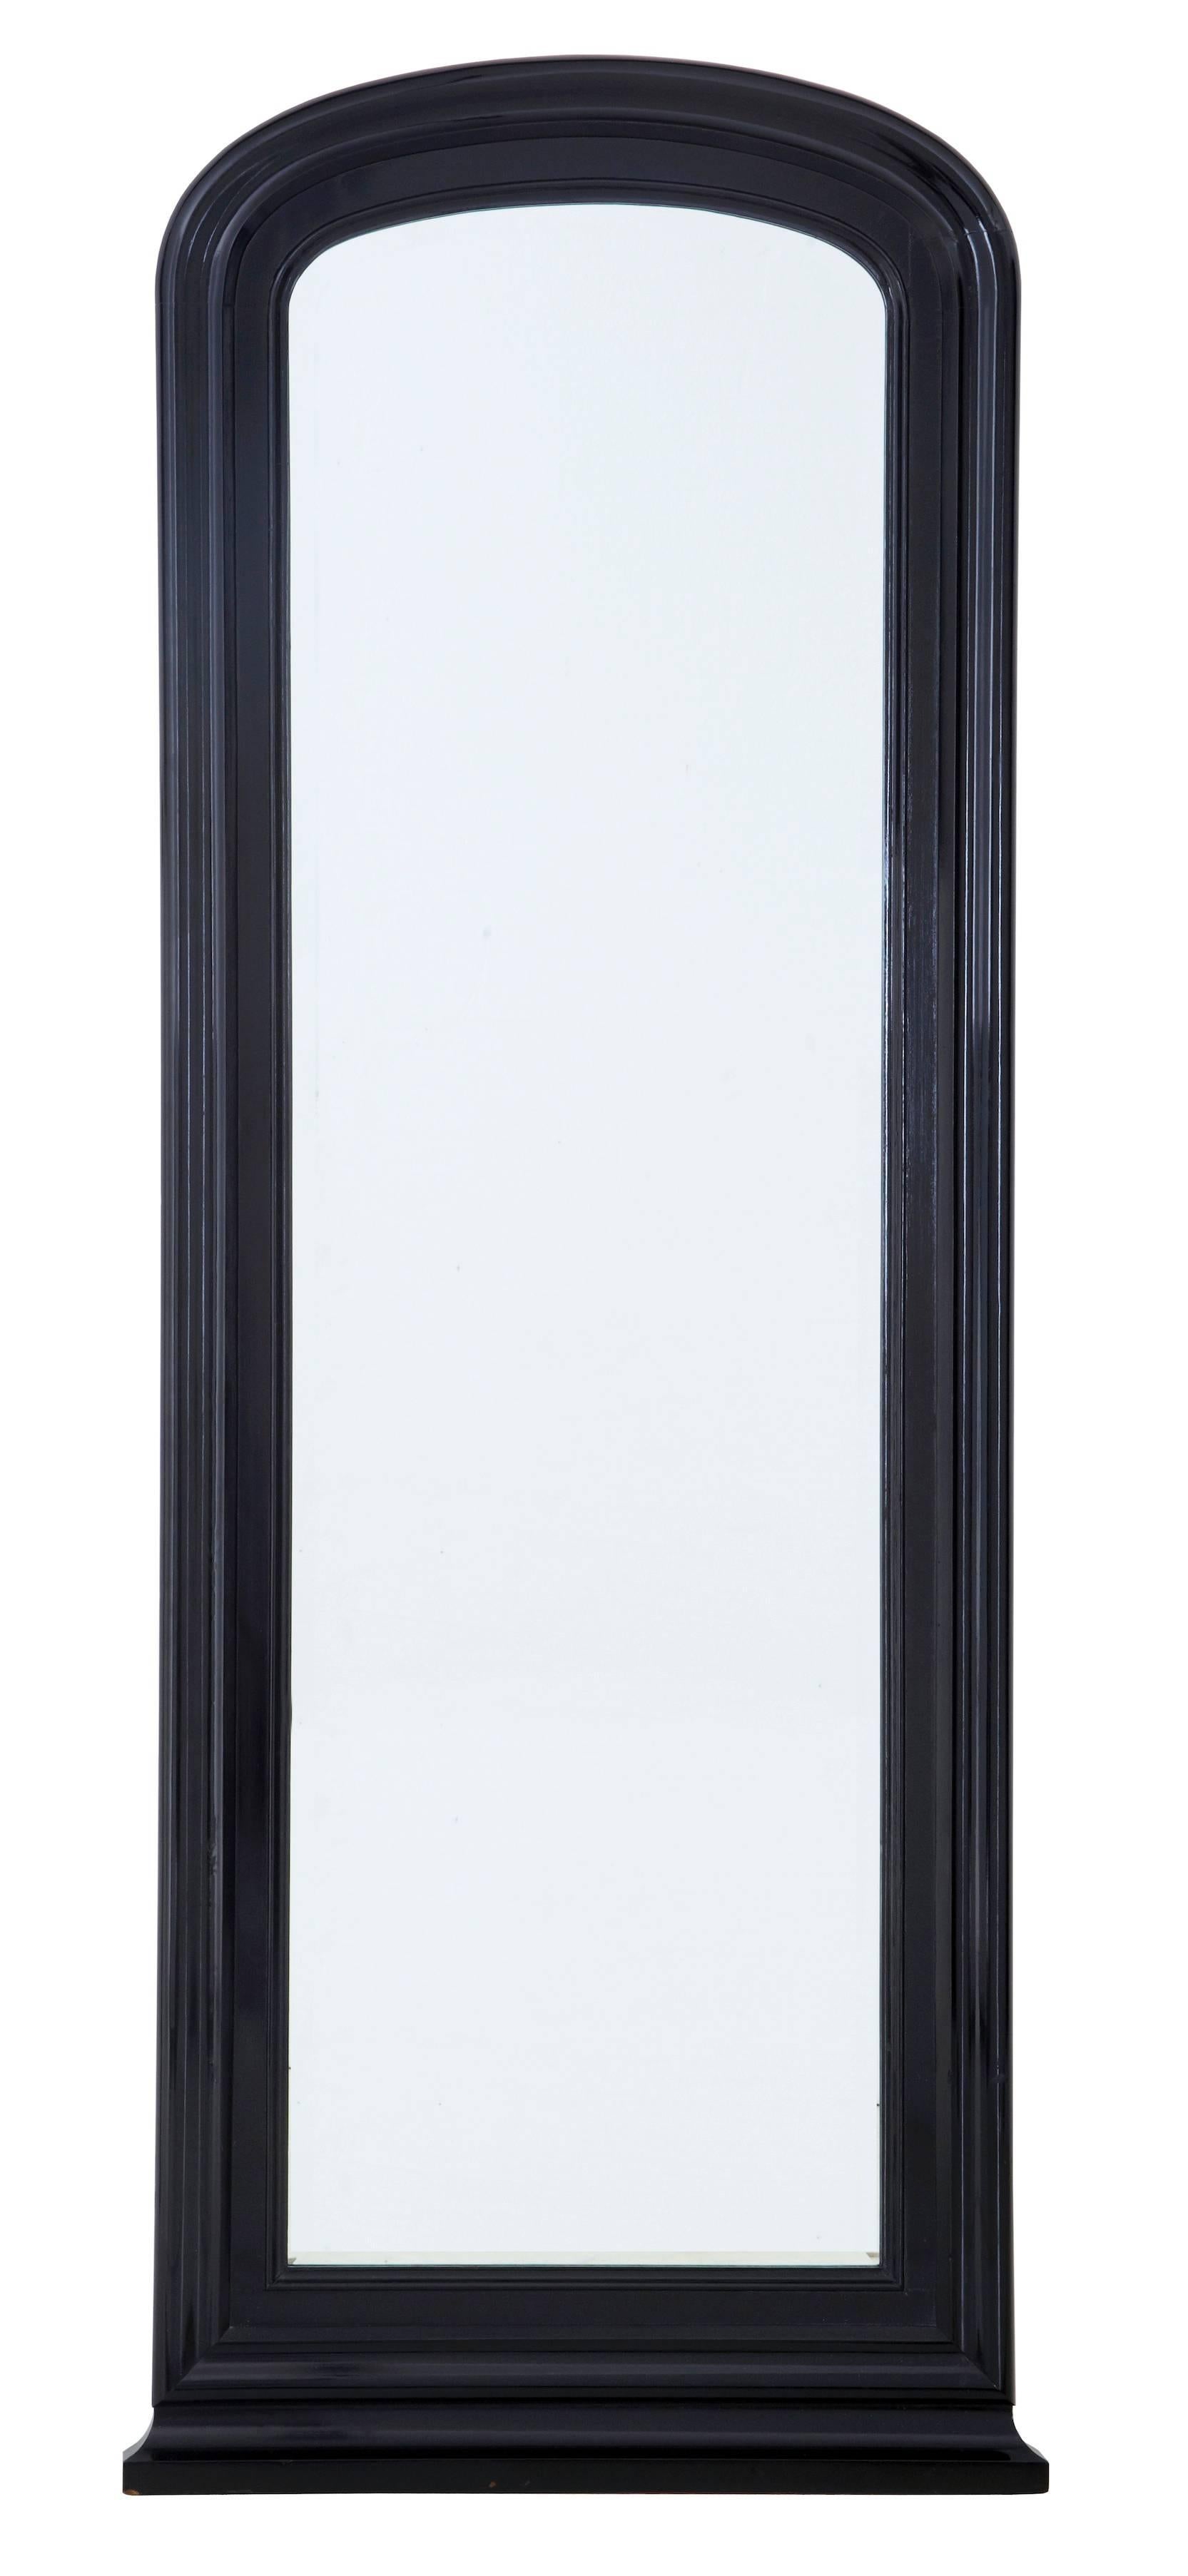 Pair of late 19th century large mirrors, circa 1890.
Later ebonized which has produced a pair of mirrors suited to most interior tastes.
Wired on the back, so can either be wall-mounted or on the floor.

Measures: Height 71